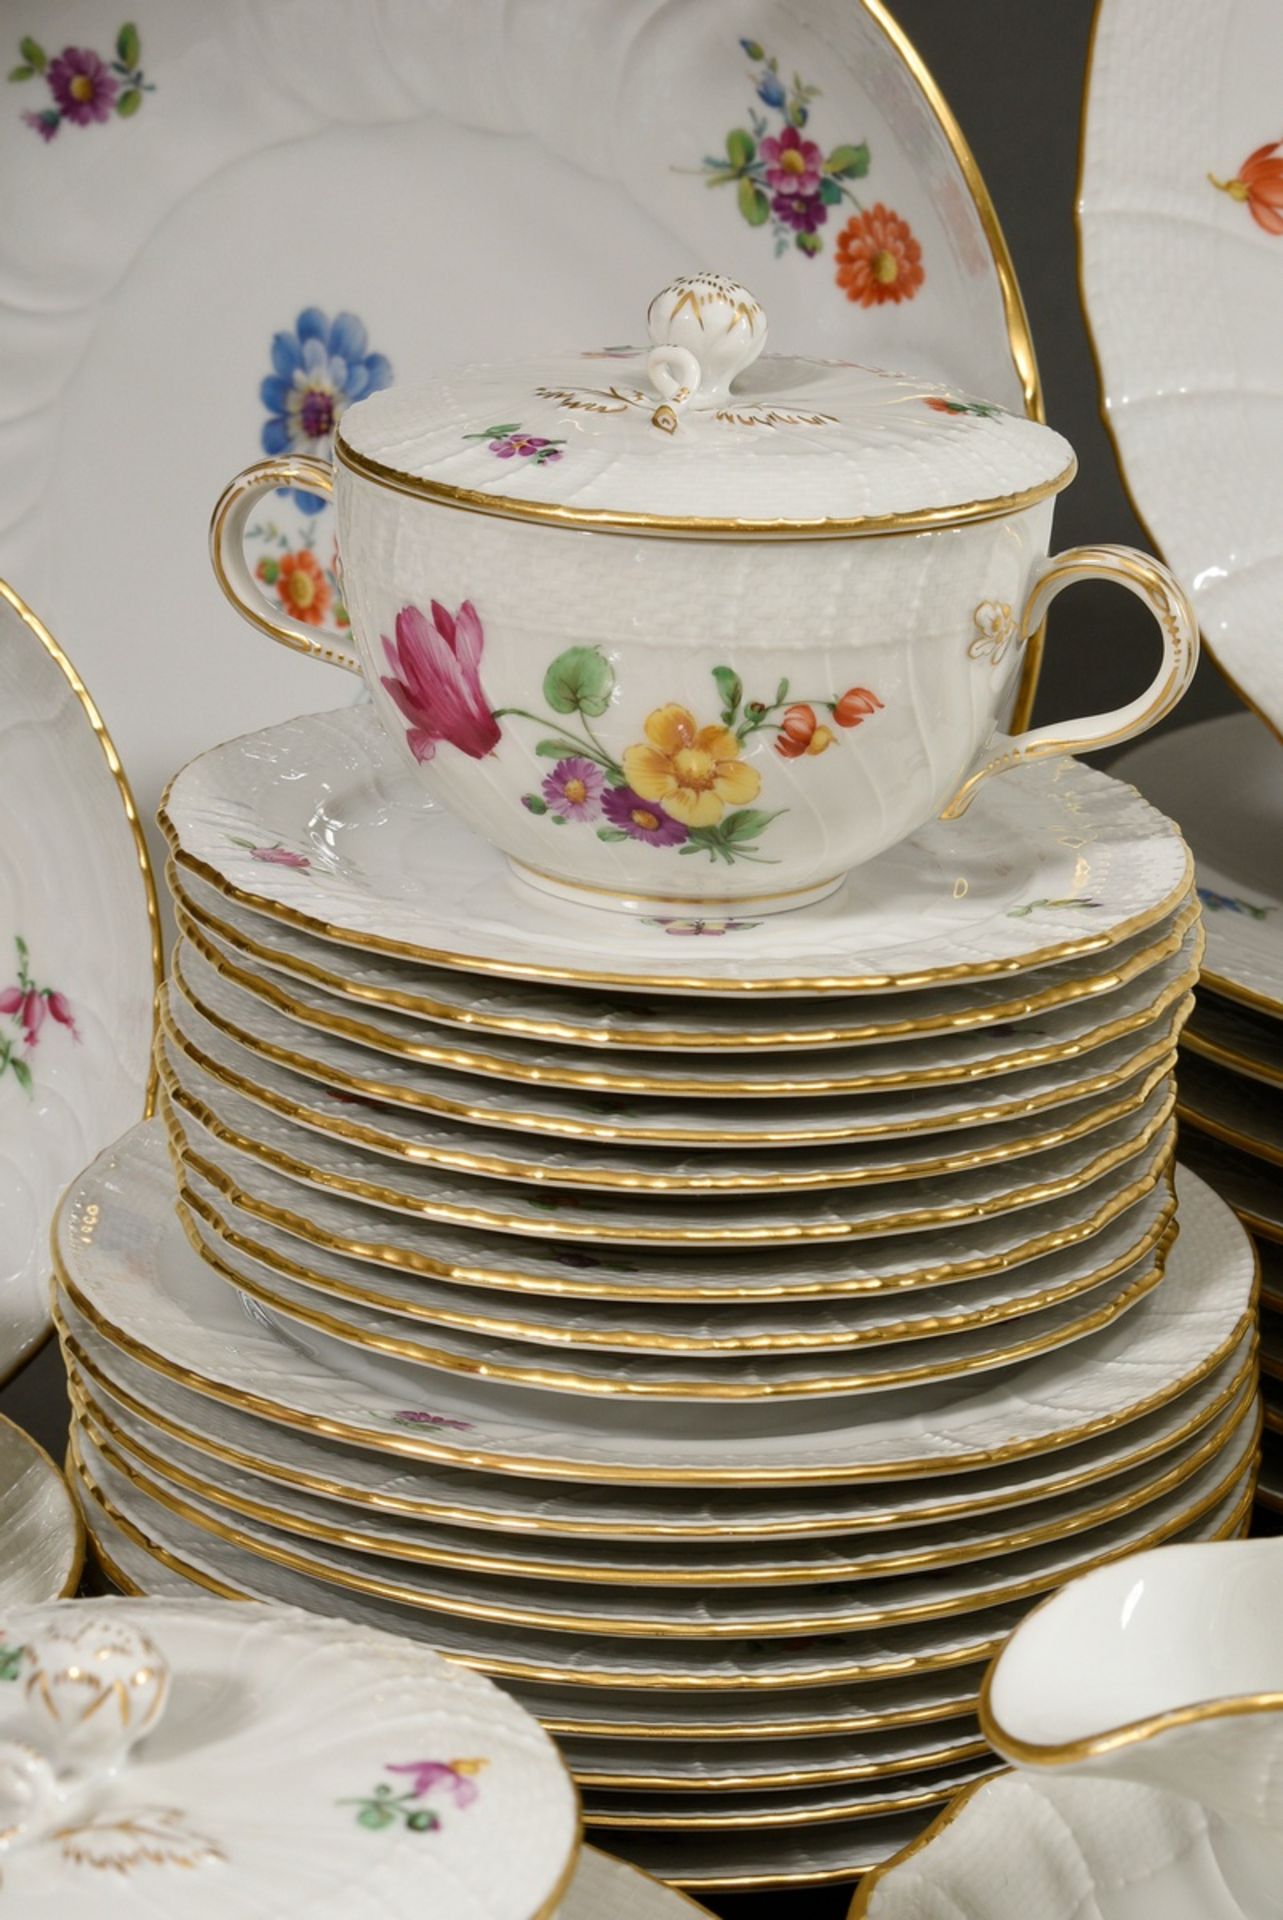 114 pieces KPM dinner service "Neuosier" with polychrome painting "flowers and insects" consisting  - Image 8 of 14